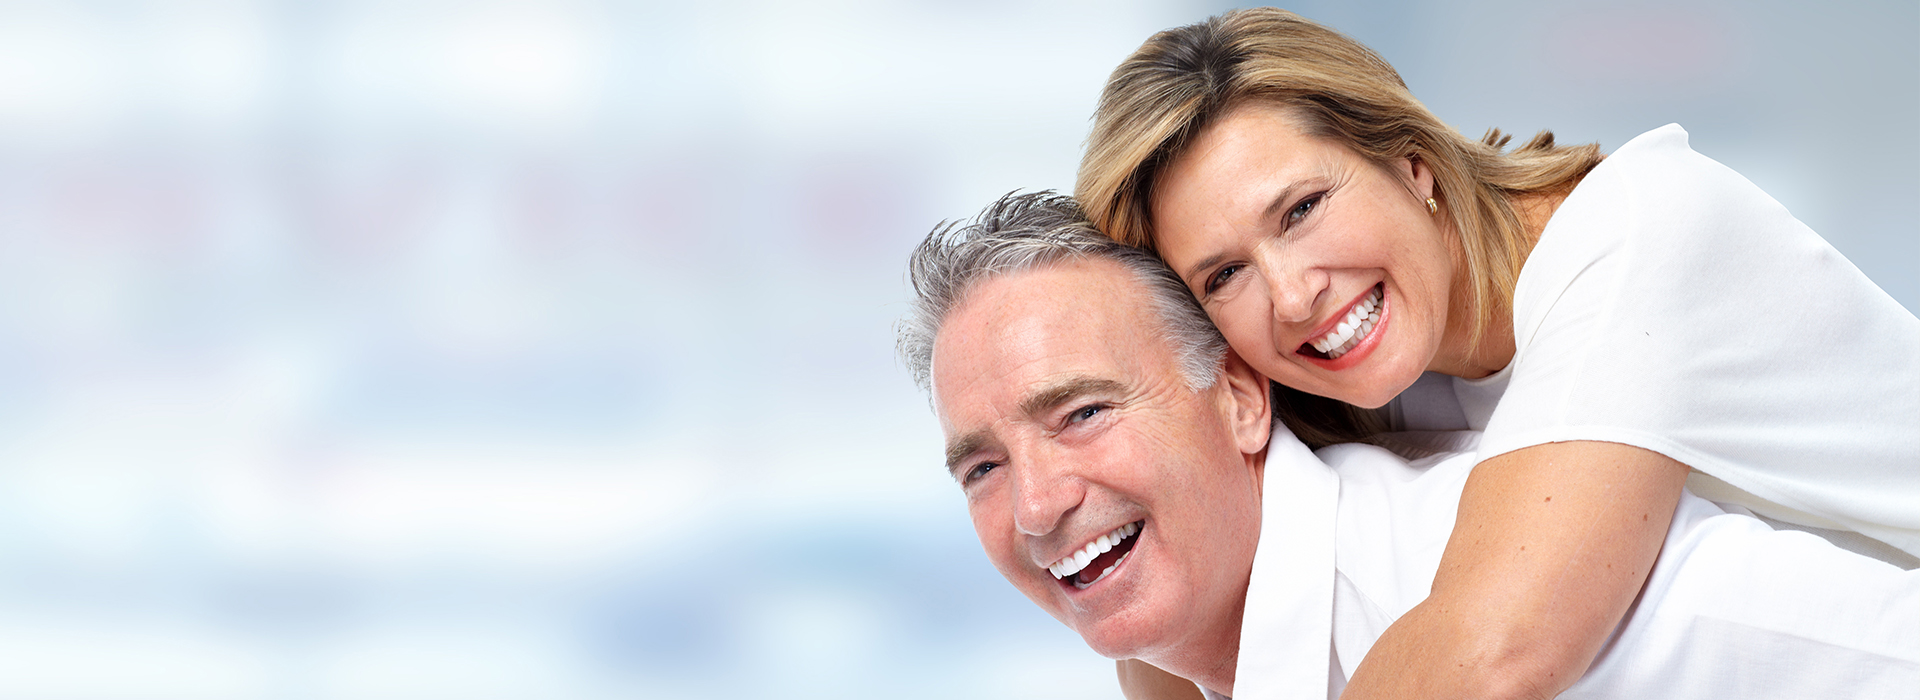 St. John Smiles Family Dentistry | Oral Cancer Screening, Root Canals and Cosmetic Dentistry